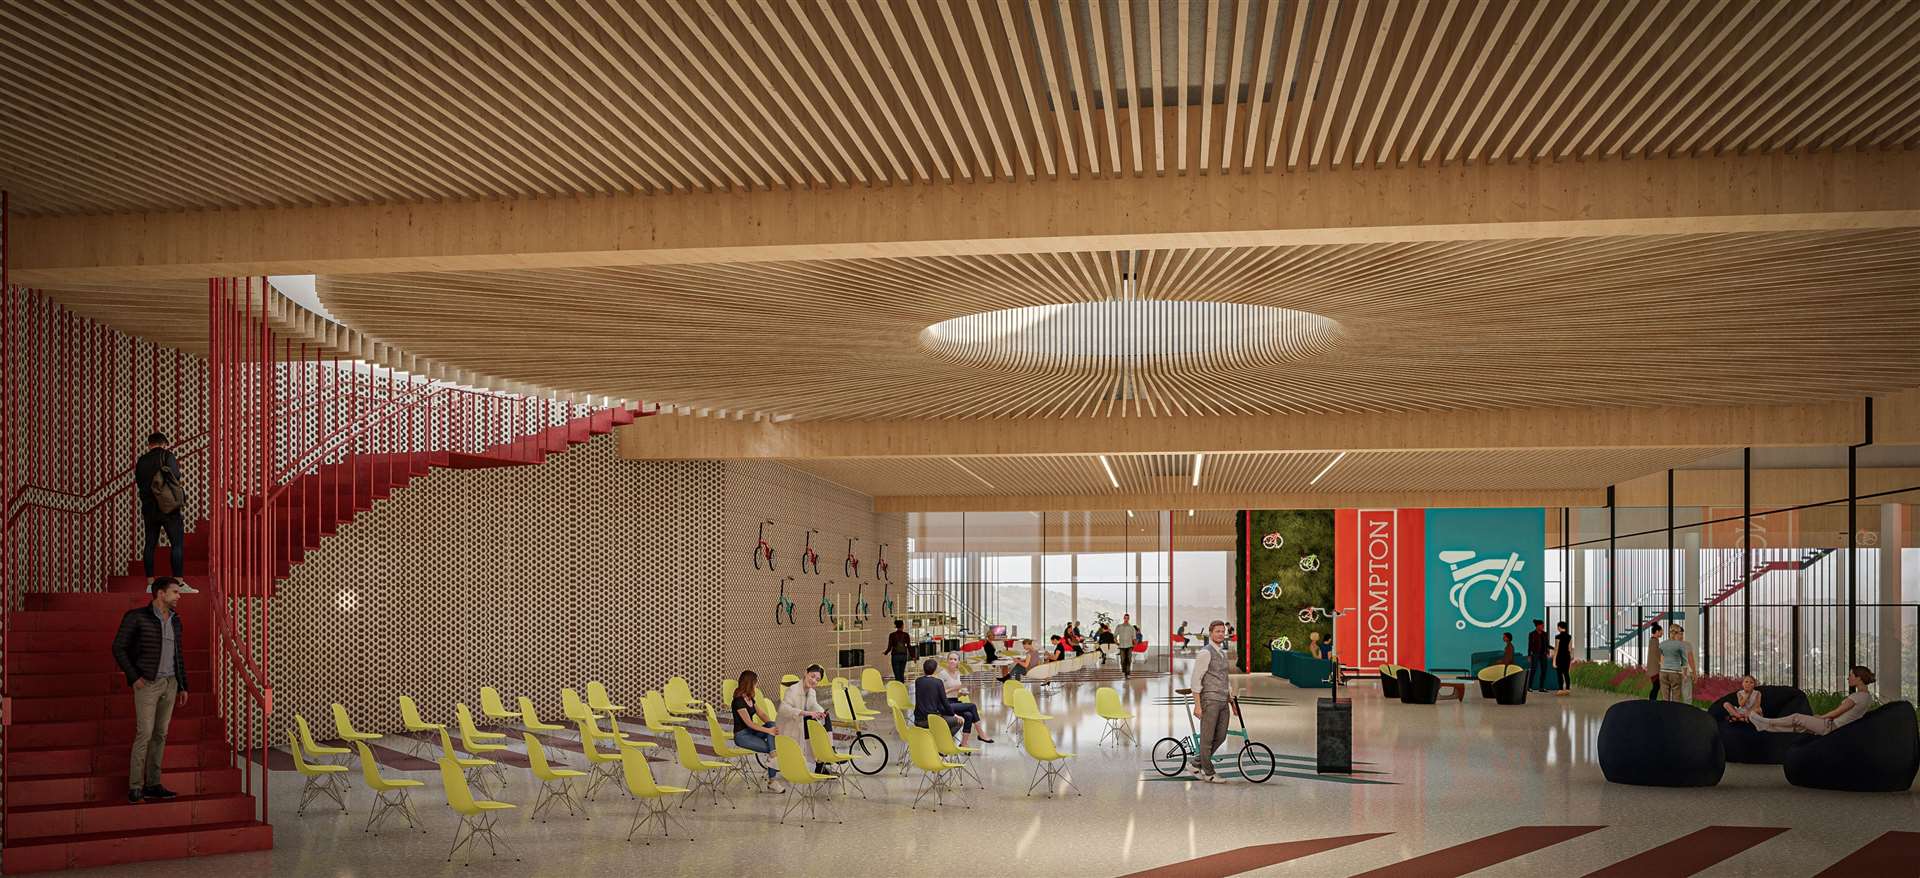 Inside the proposed Brompton factory. Picture: Hollaway Studio